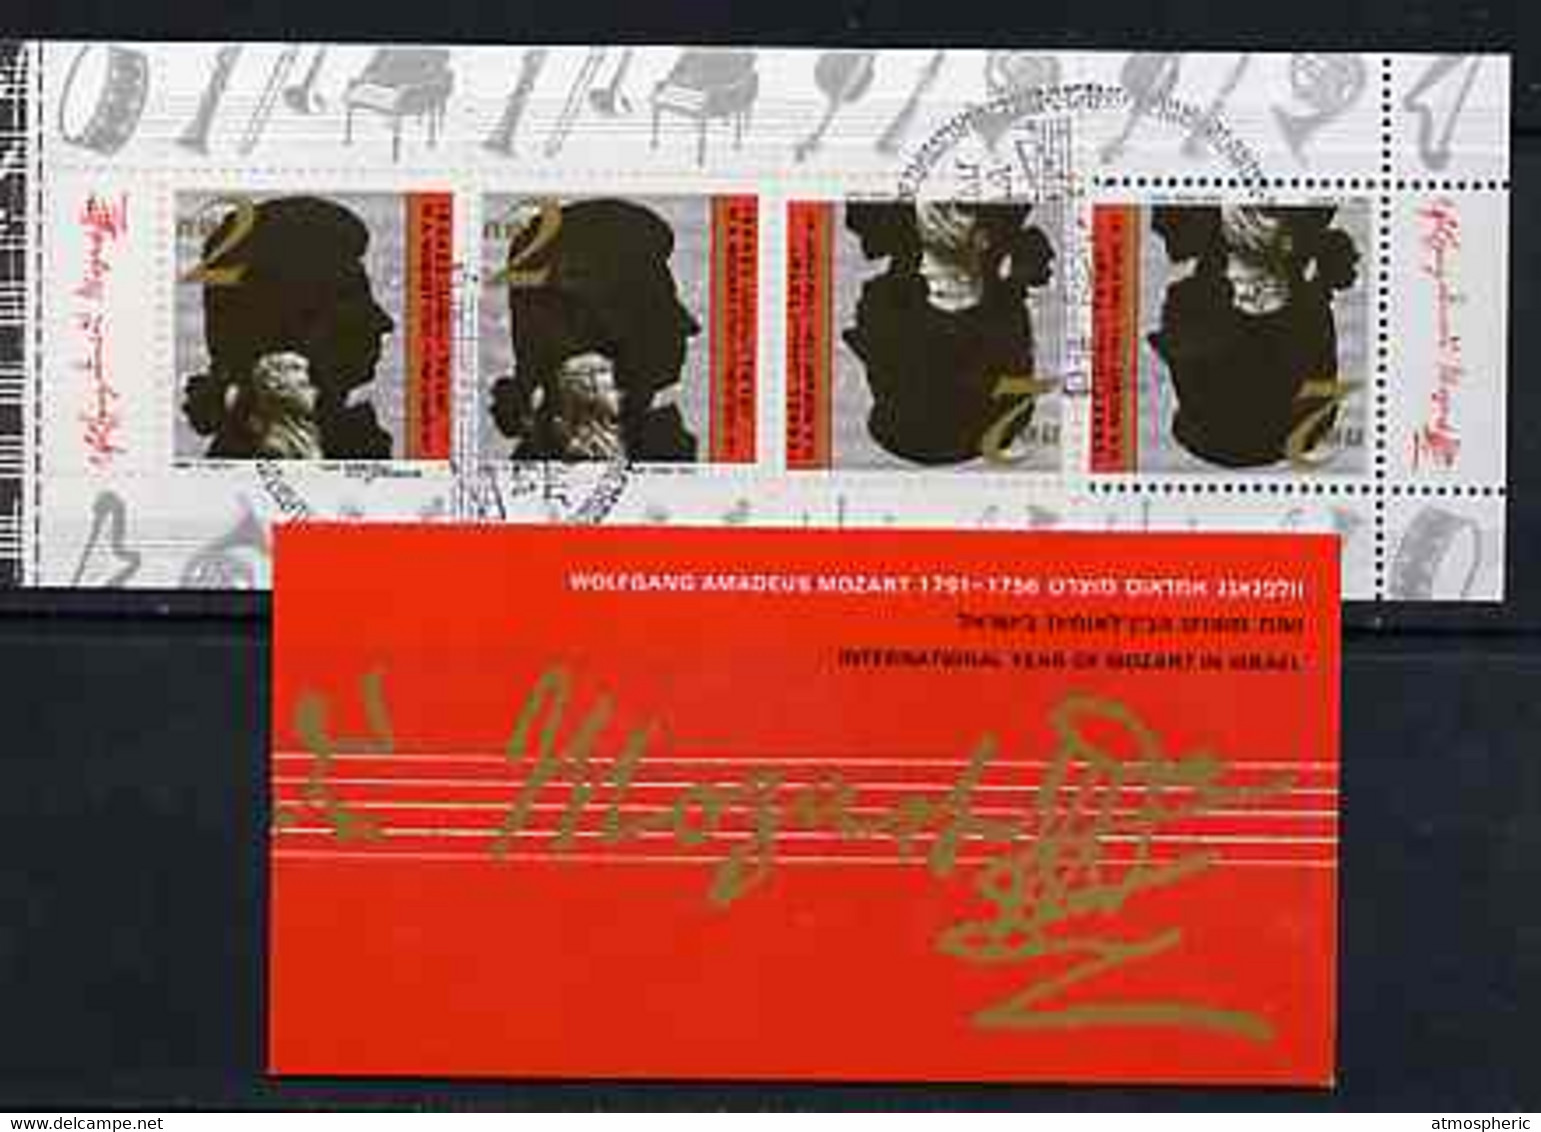 Booklet - Israel 1991 Mozart 8s Booklet (tete-beche Pane) Complete With First Day Commemorative Cancels, SG SB22 - Booklets